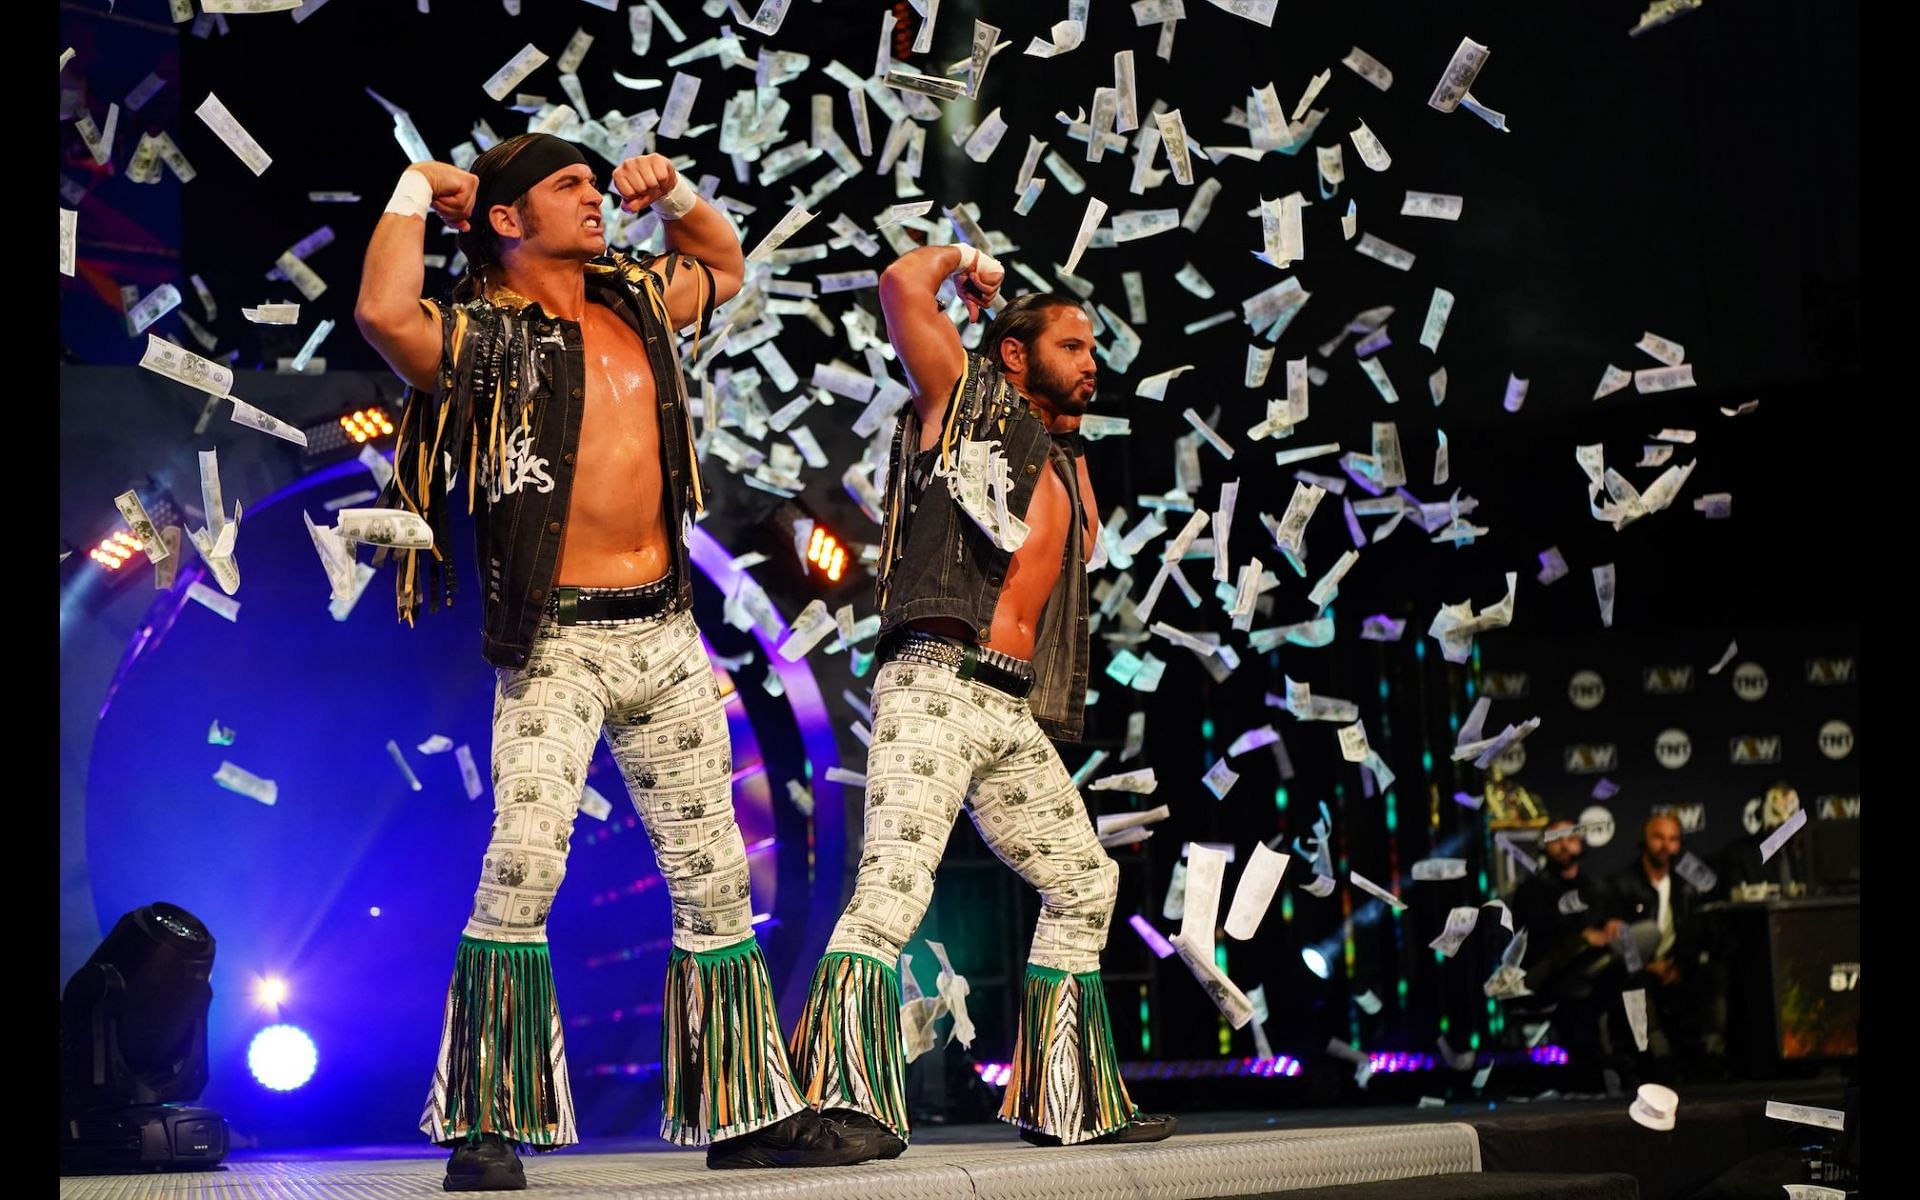 The Young Bucks are former AEW Tag Team Champions